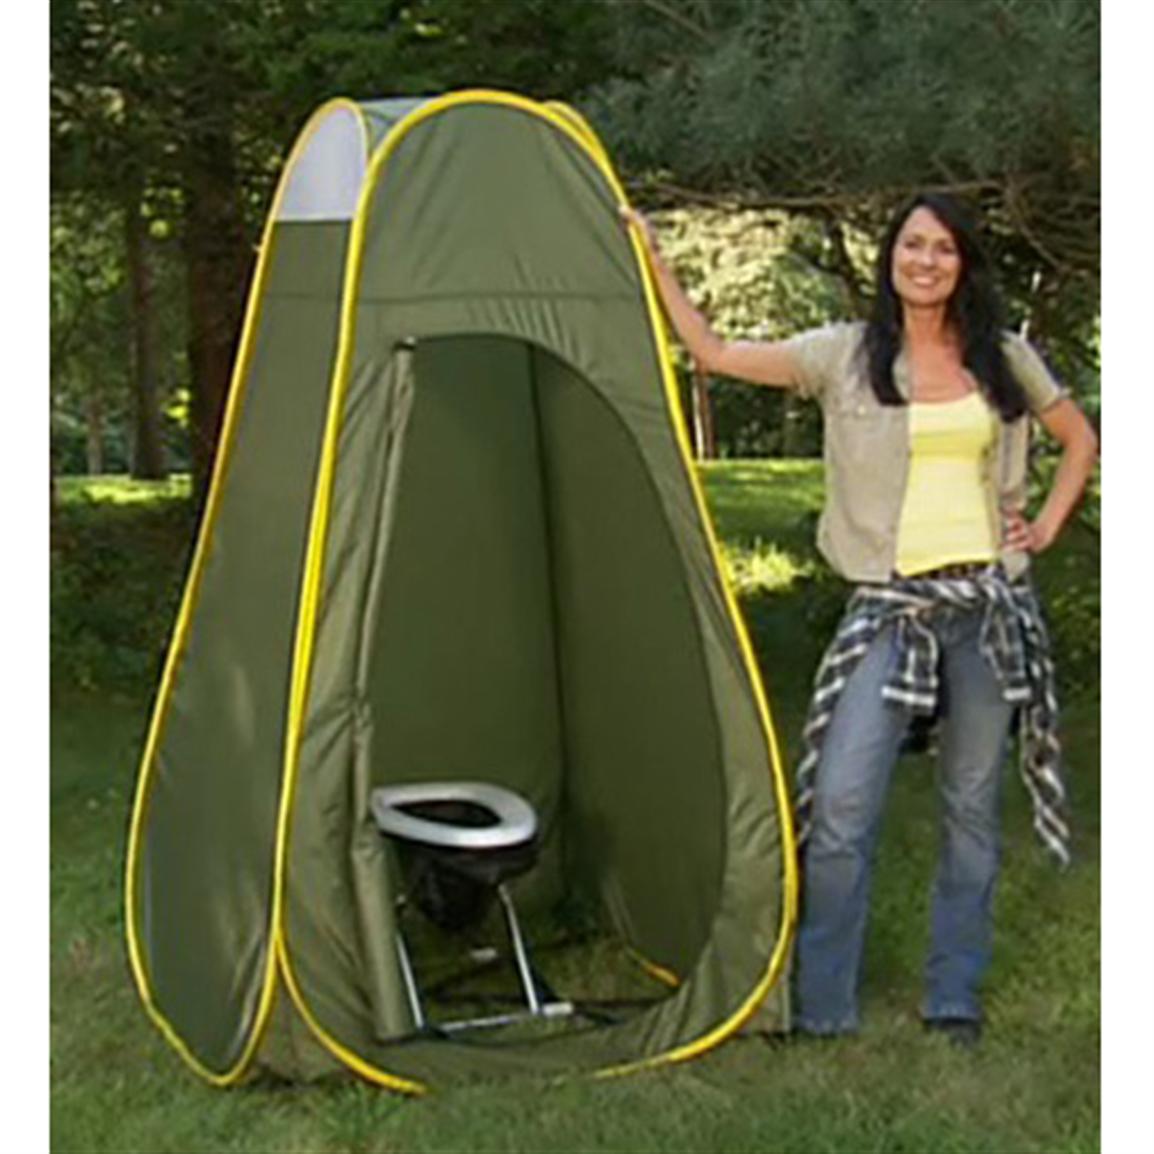 Privacy Pop - Up - 175164, Portable Toilets & Showers at Sportsman's Guide